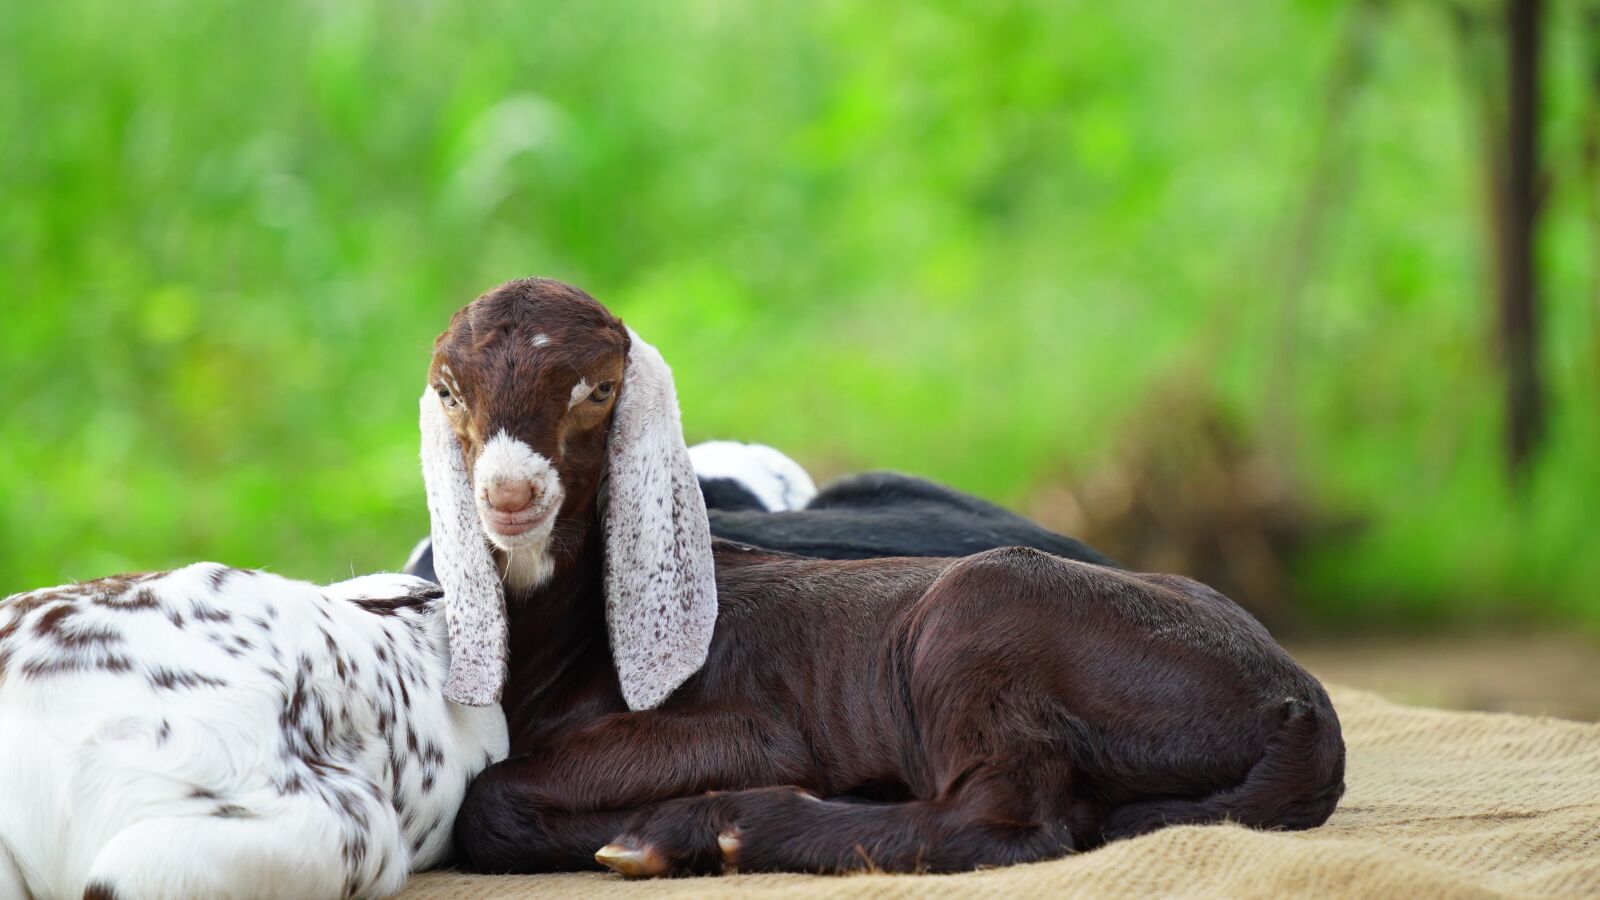 Sony a7 III + Tamron 28-200mm F2.8-5.6 Di III RXD sample photo. Goat, lings, pet photography